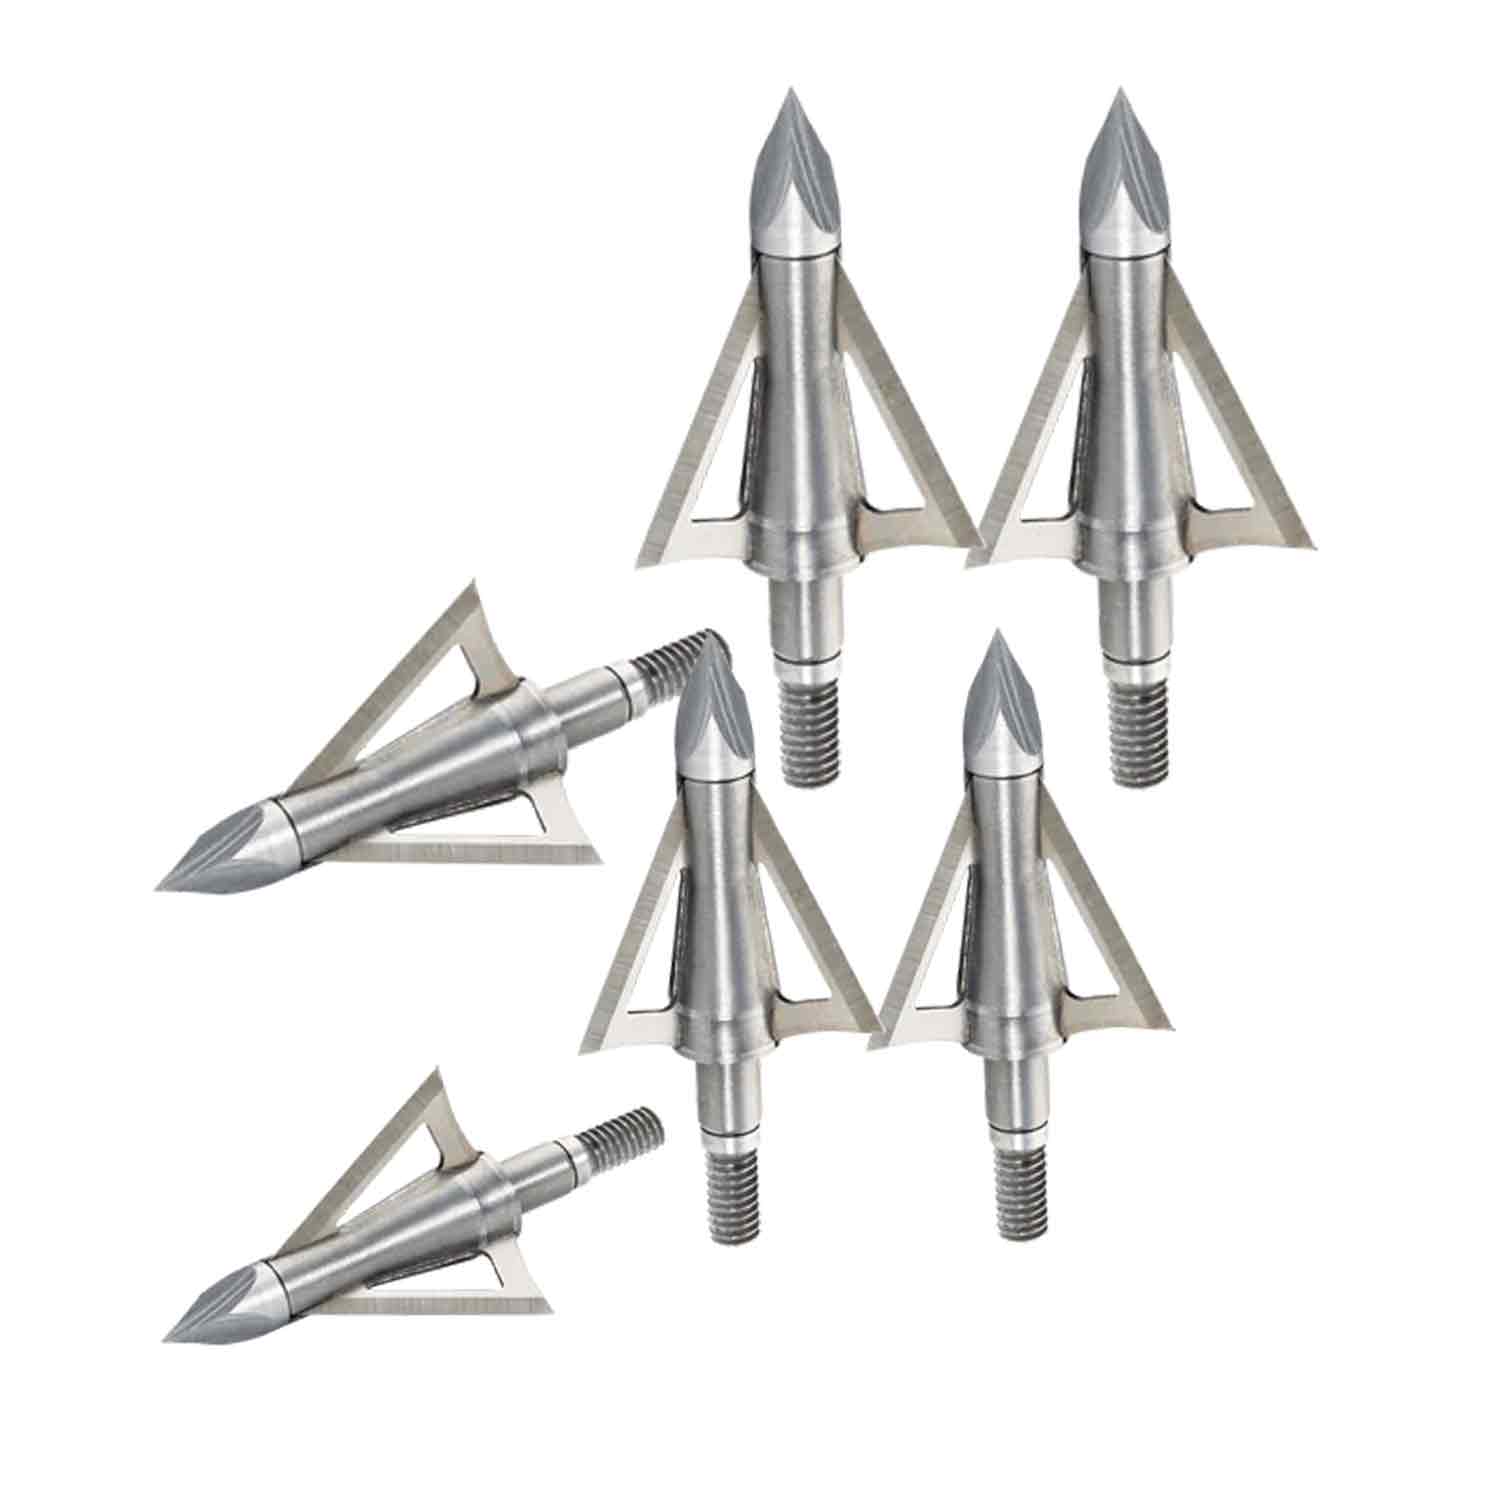 Excalibur Boltcutter Fixed Blade Broadheads (150g)